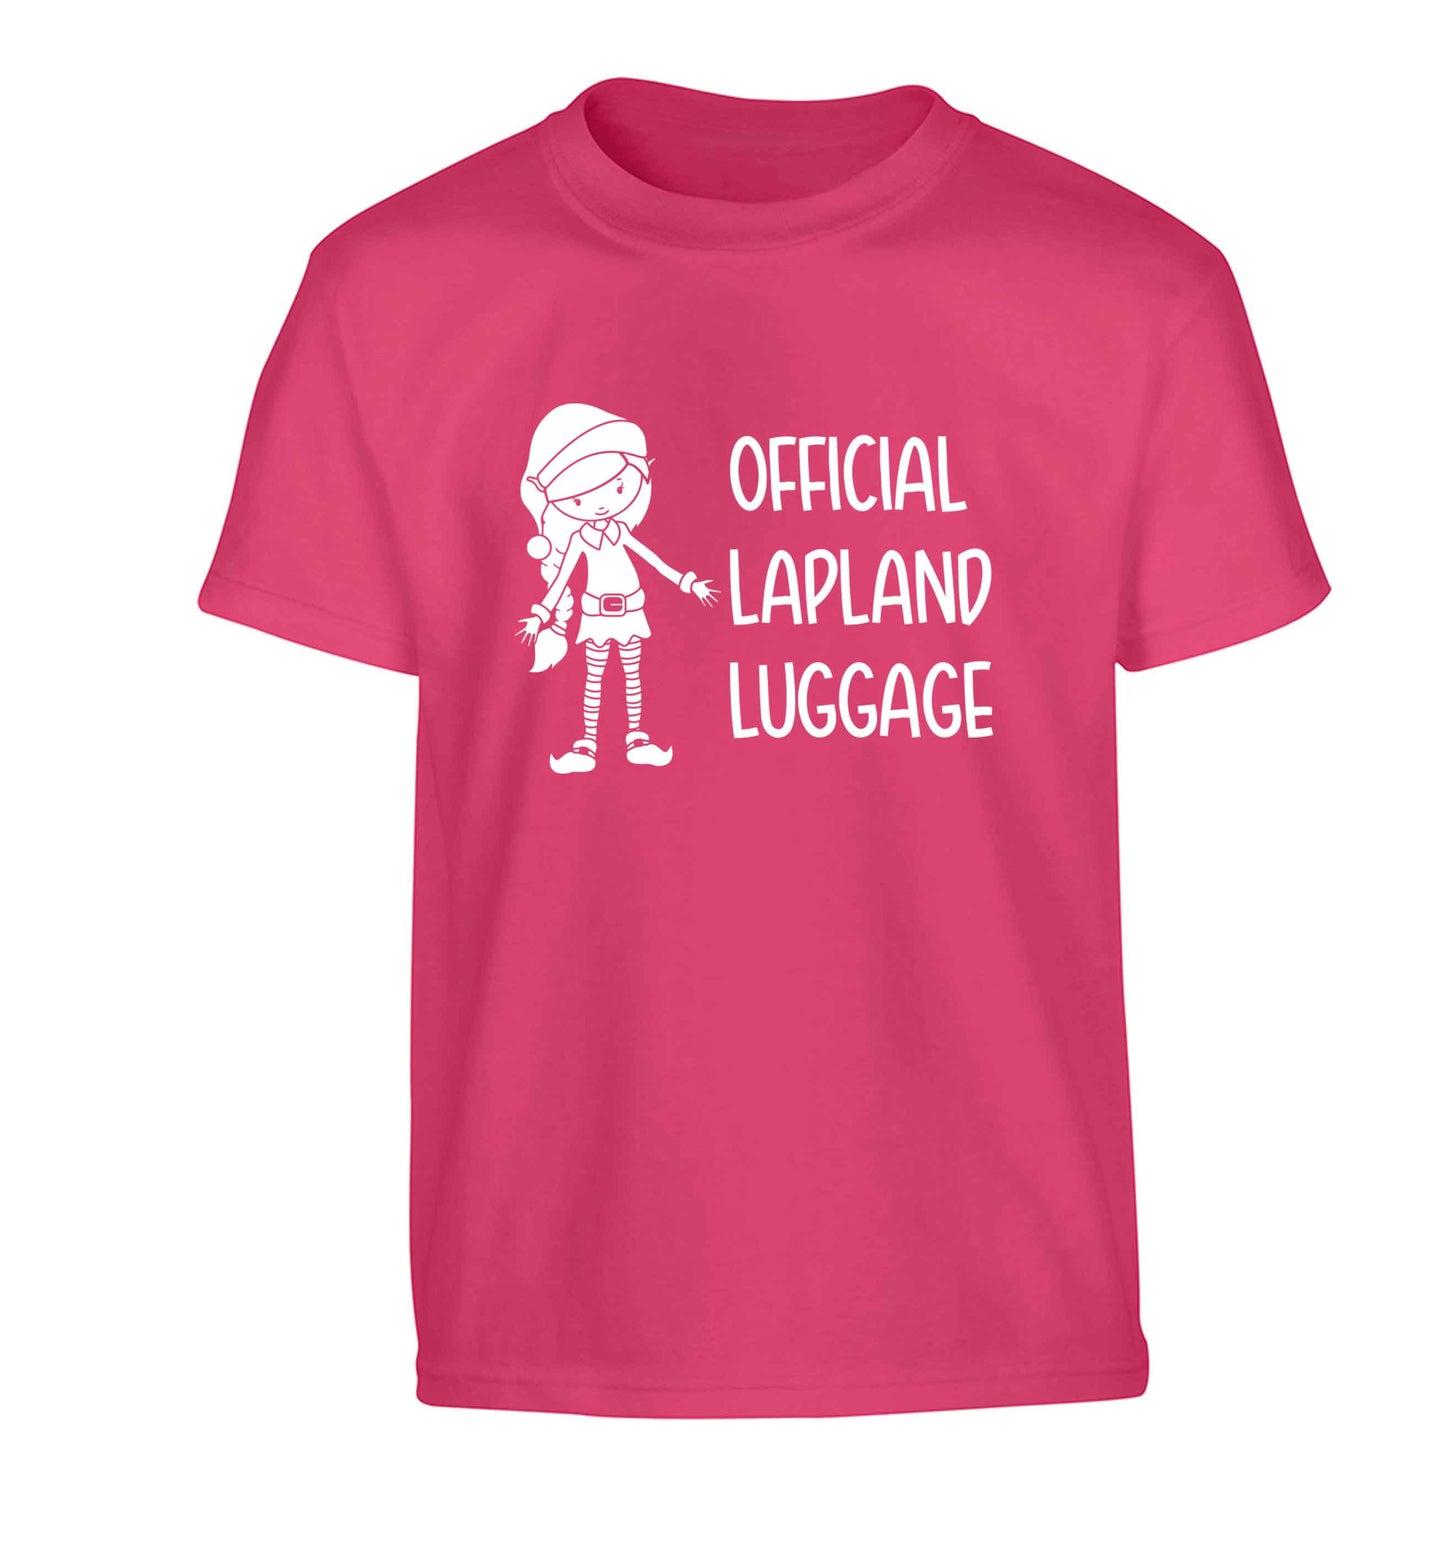 Official lapland luggage - Elf snowflake Children's pink Tshirt 12-13 Years